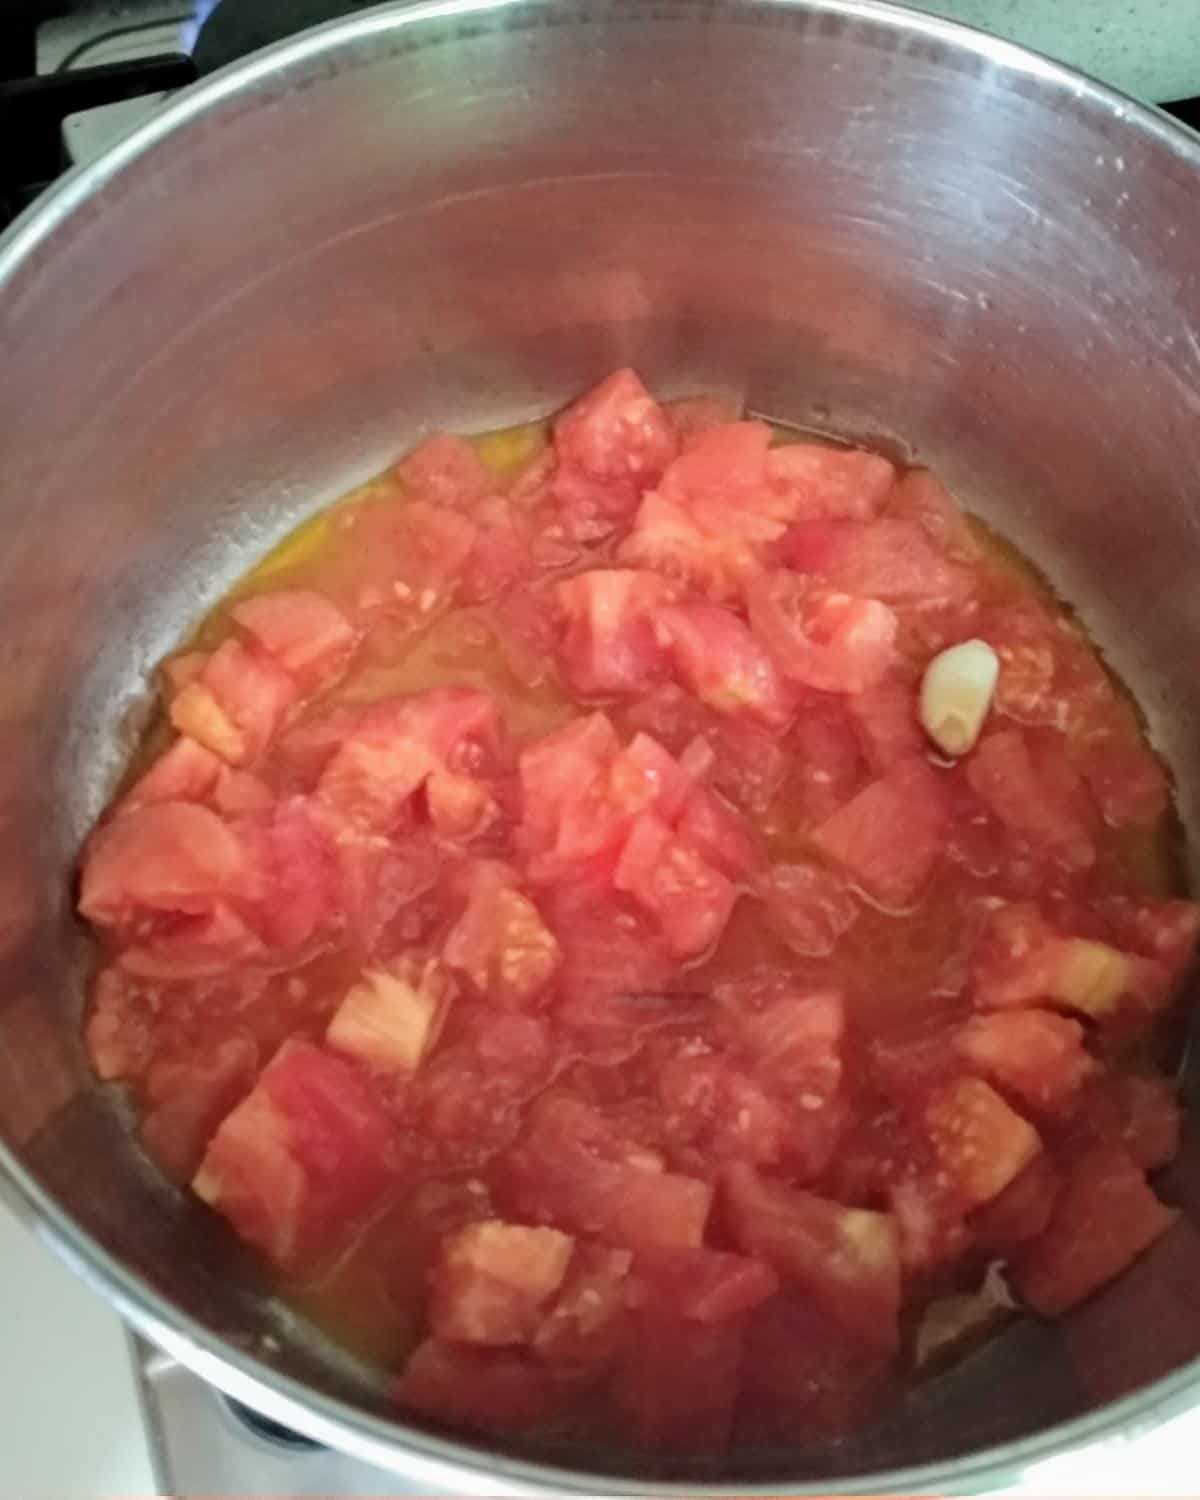 Process - cook tomatoes